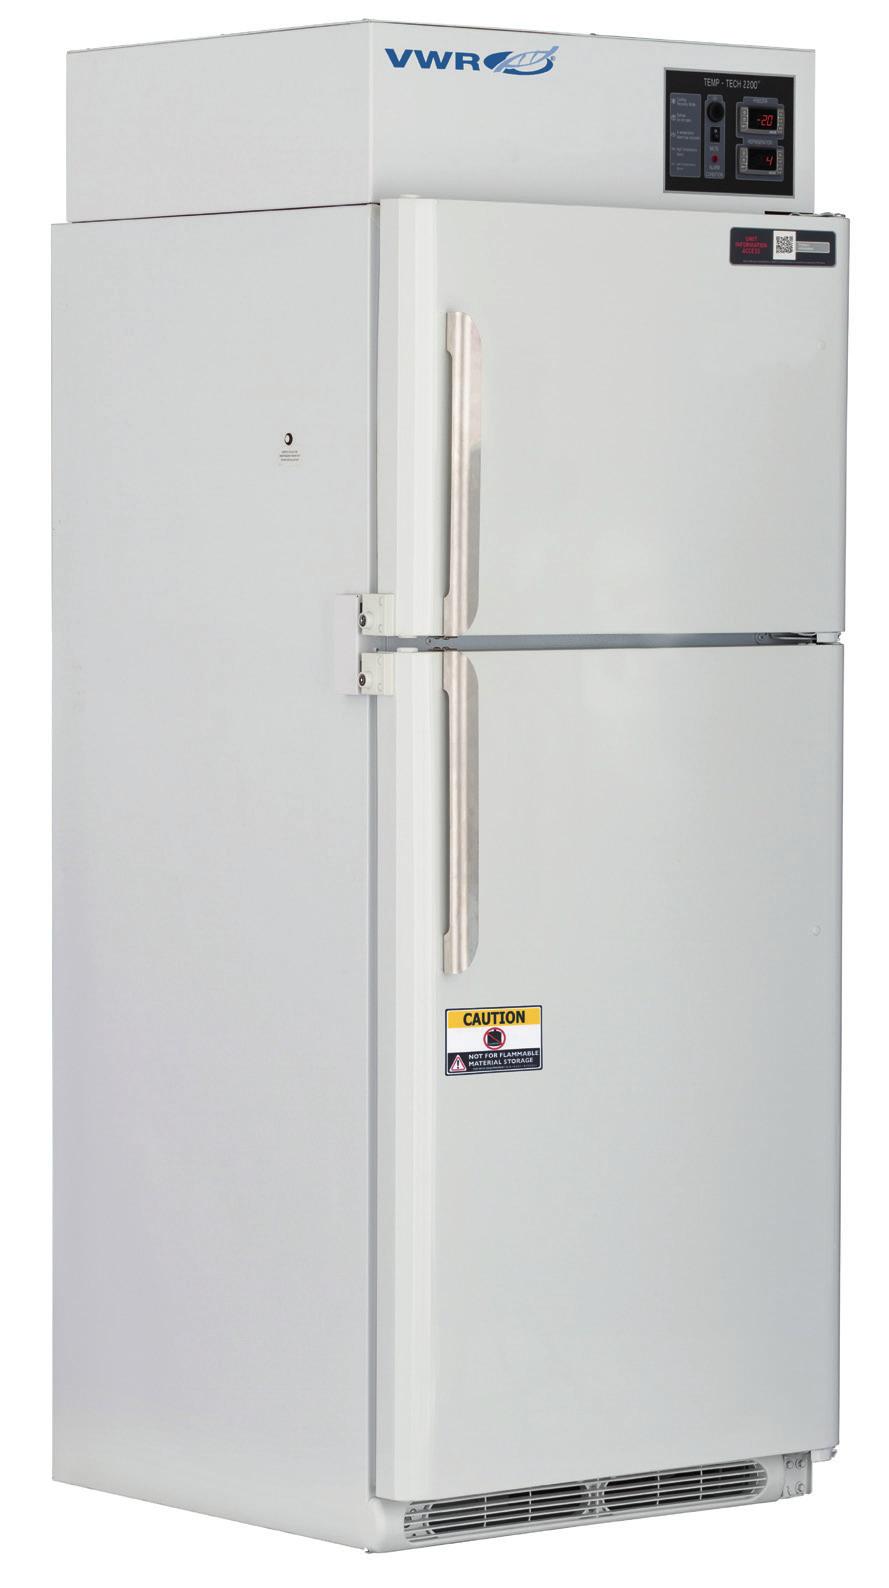 100% INDEPENDENT DUAL LABORATORY REFRIGERATOR / FREEZER COMBO Accessories Data loggers Extra shelves Standard features include a microprocessor temperature controller for superior temperature